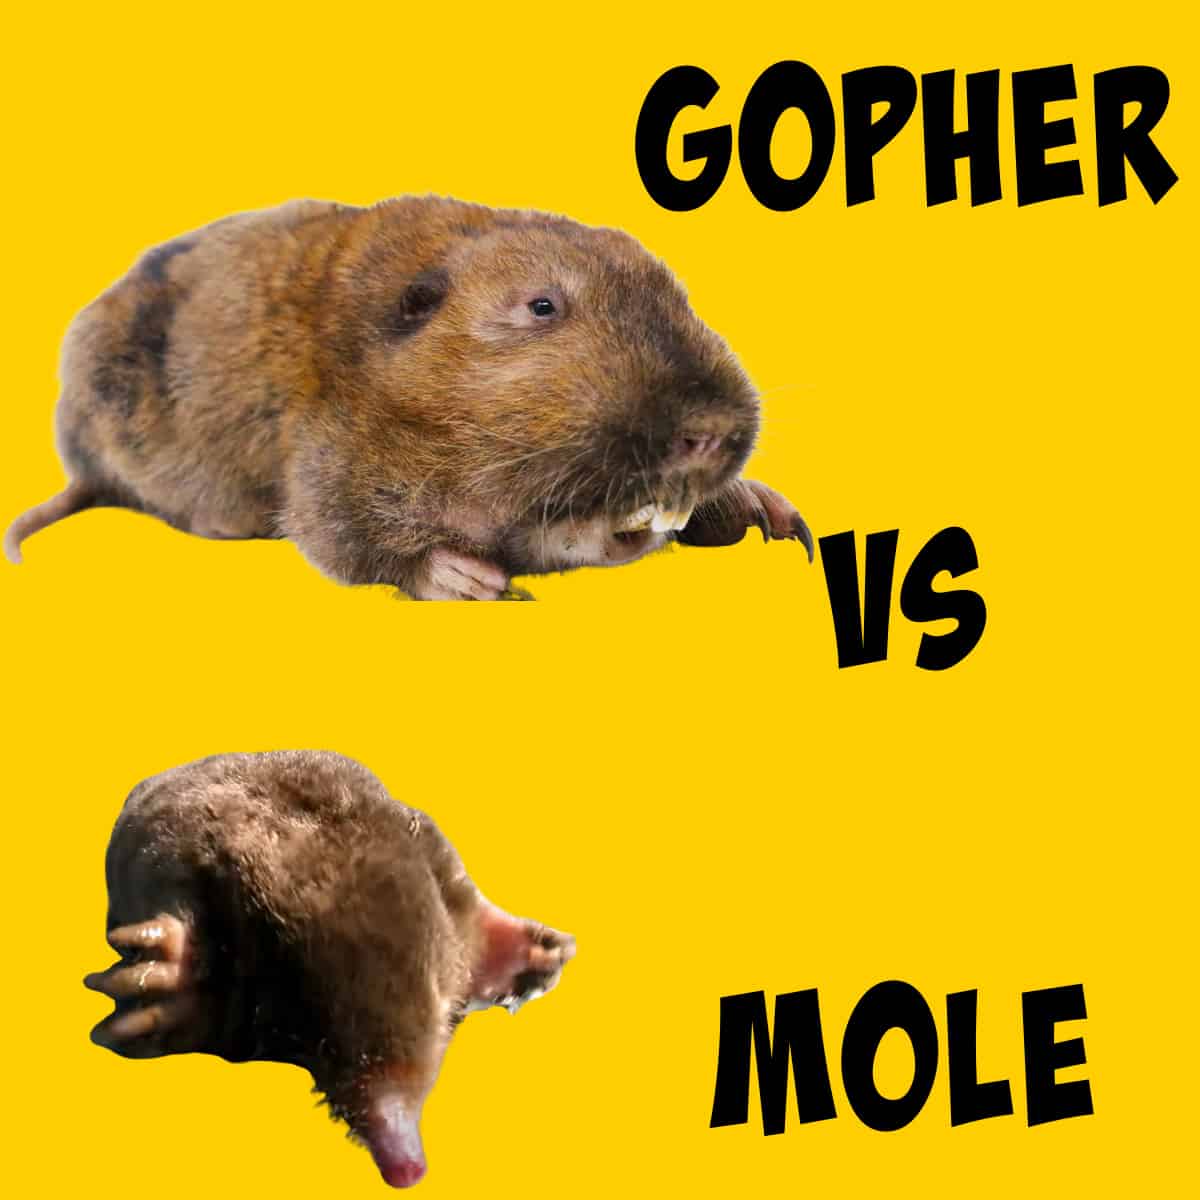 Picture of a gopher compared to a picture of a mole